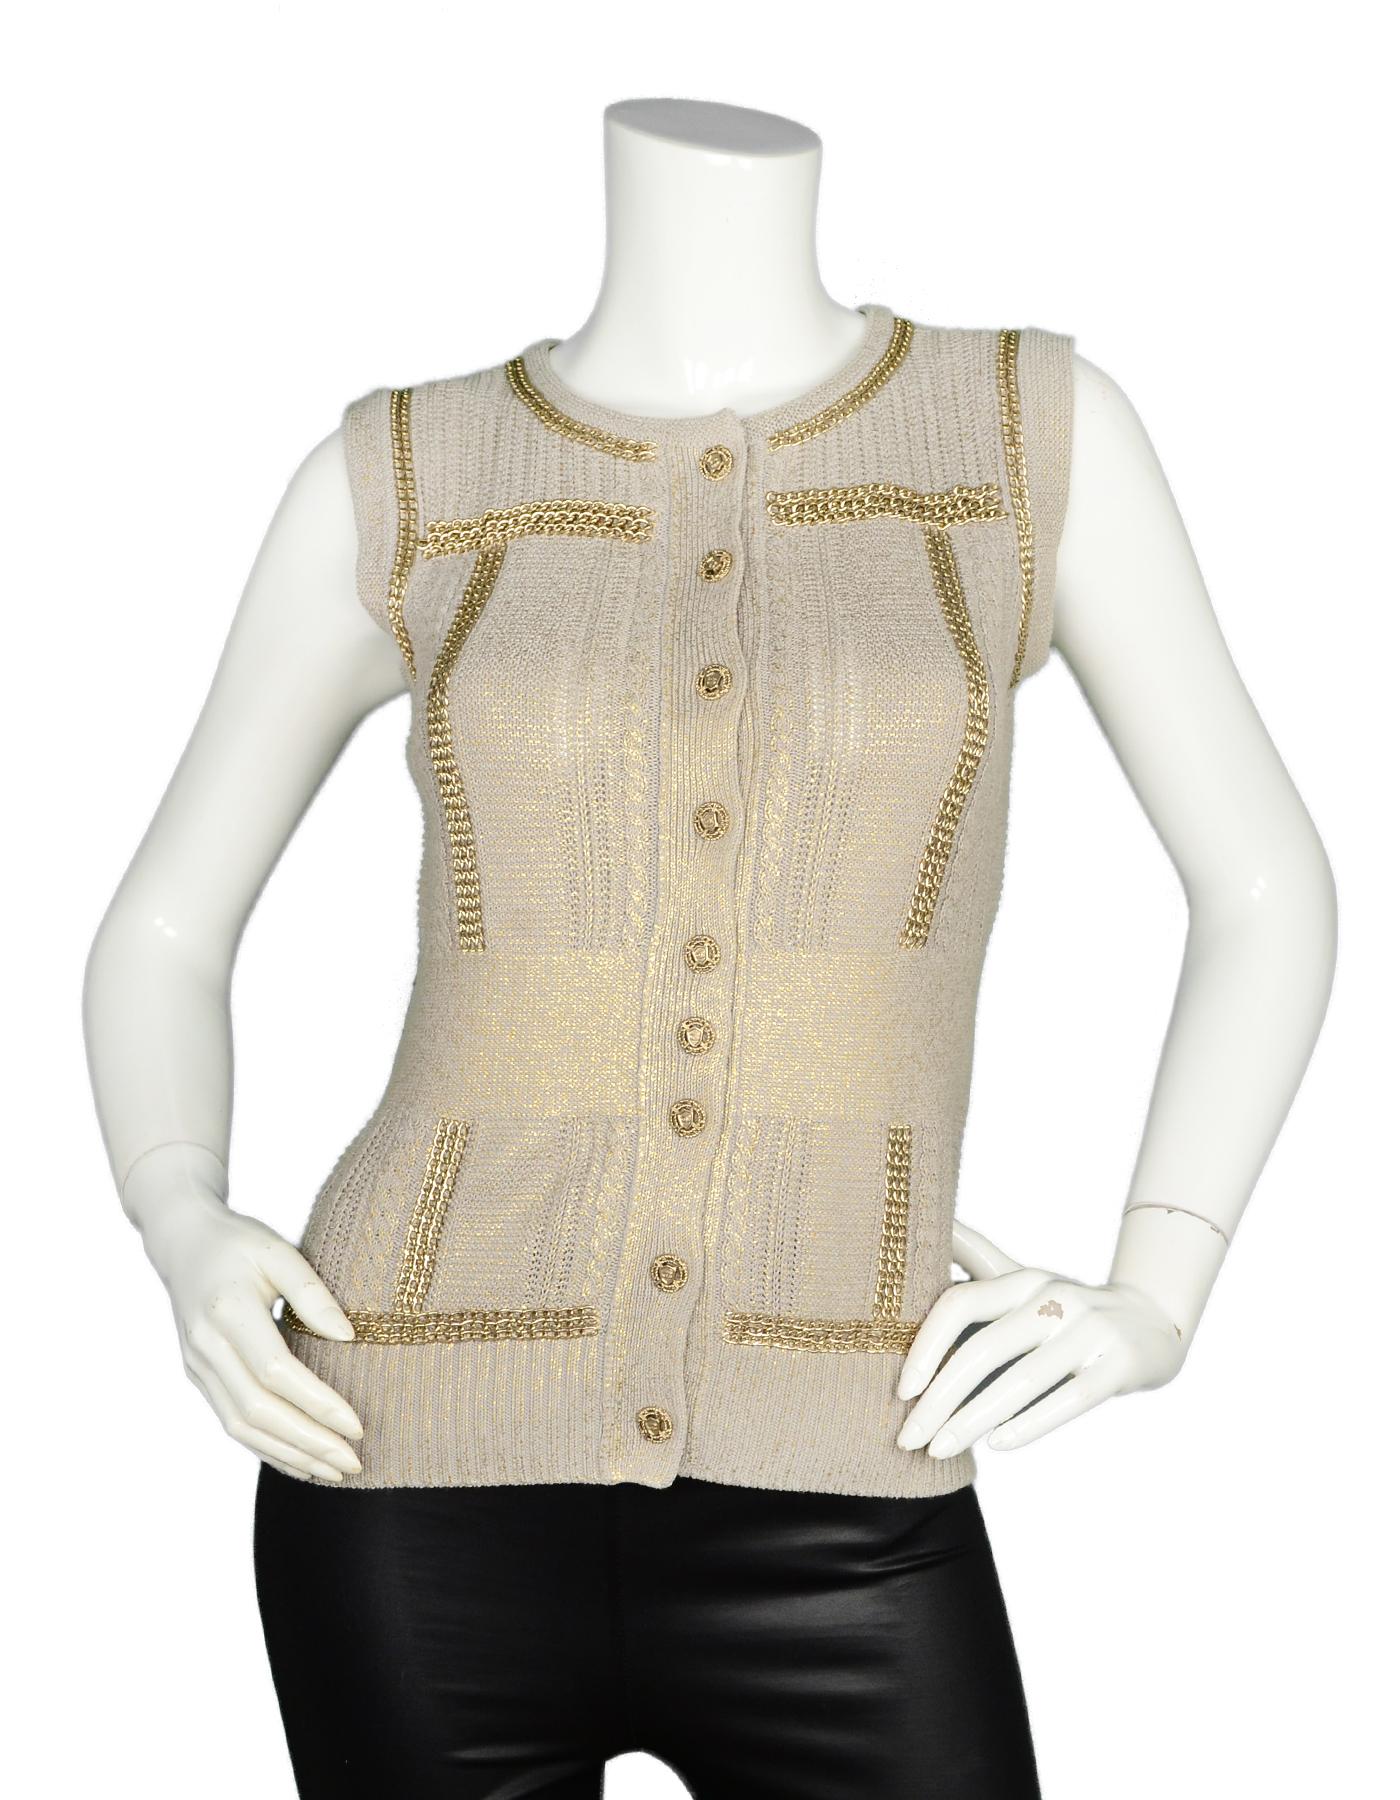 Chanel Taupe Grey/Gold Metallic Knit Vest W/ Chain Detailing & CC Shield Buttons Sz 38

Made In: Italy
Year of Production: 2008
Color: Taupe grey and gold
Materials: 56% rayon, 44% cotton, metal
Opening/Closure: CC shield button down front
Overall